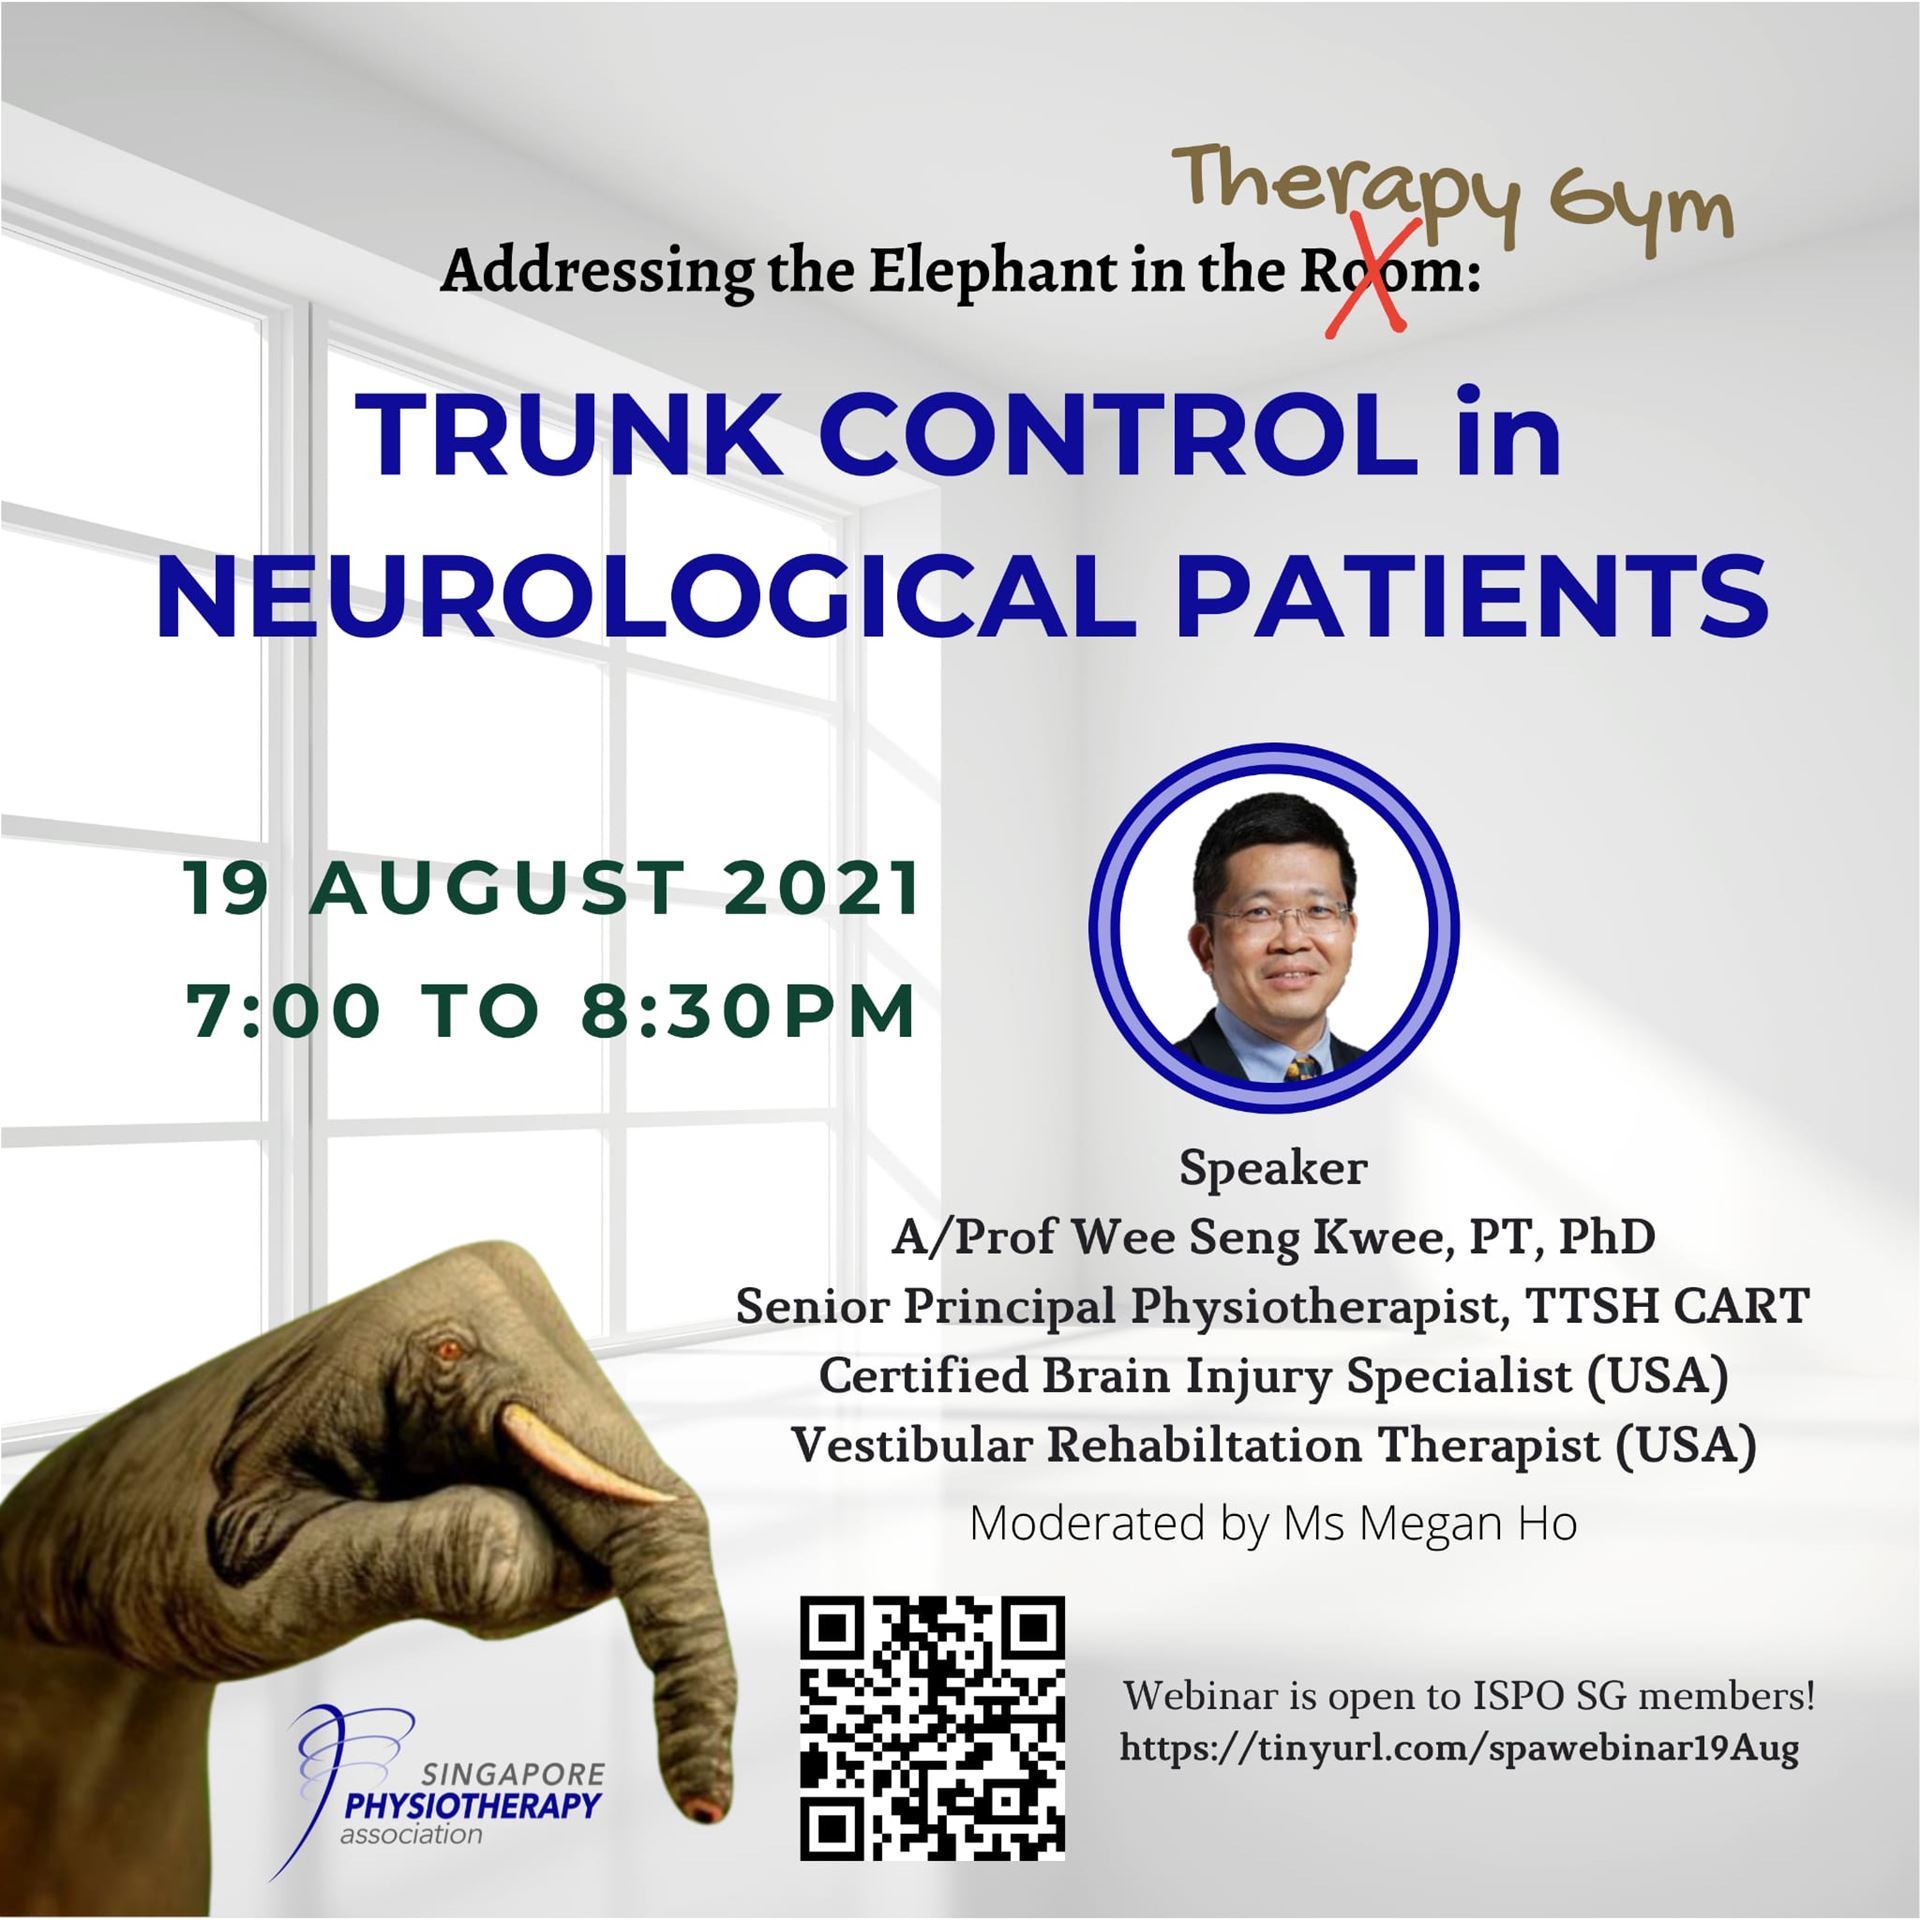 Singapore Physiotherapy Association - SPA Neuro SIG Event - Addressing the  Elephant in the Therapy Gym: Trunk control in Neurological Patients.